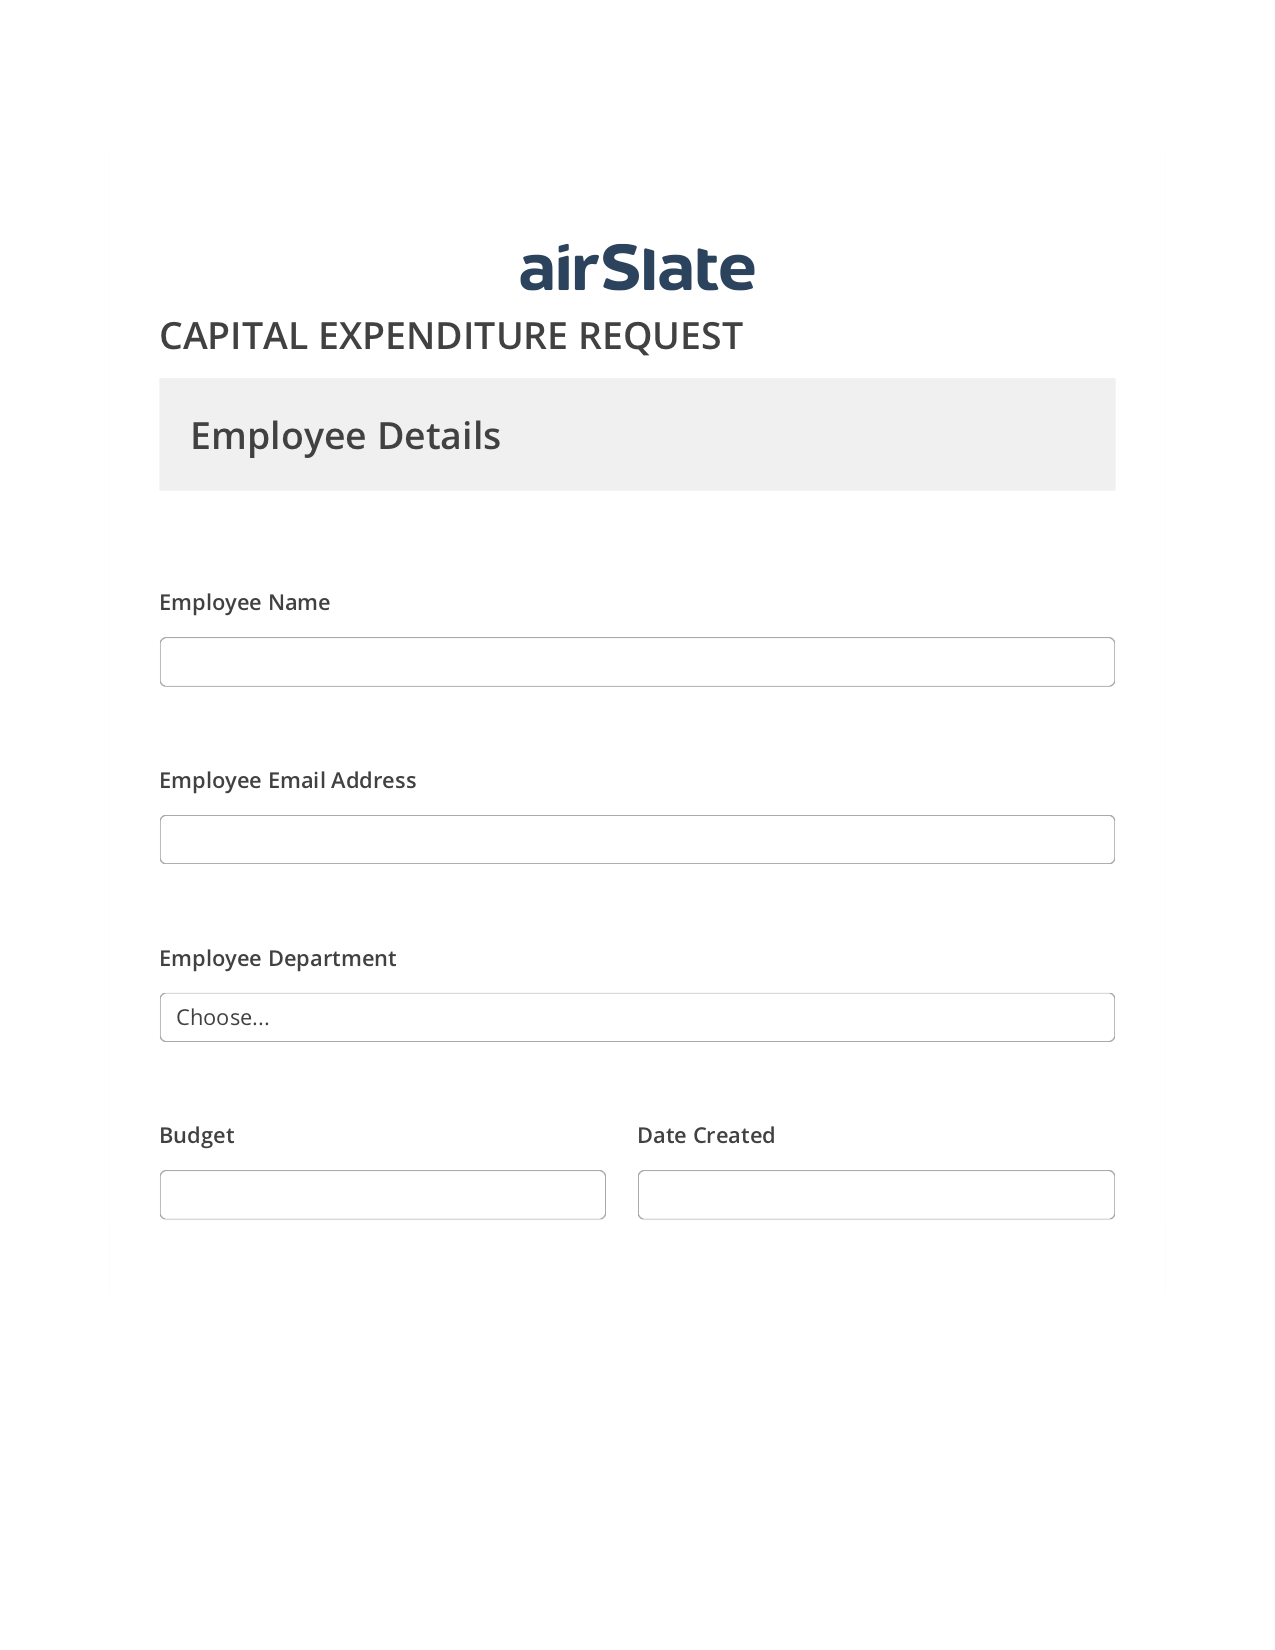 Capital Expenditure Request Approval Flow Open under a Role Bot